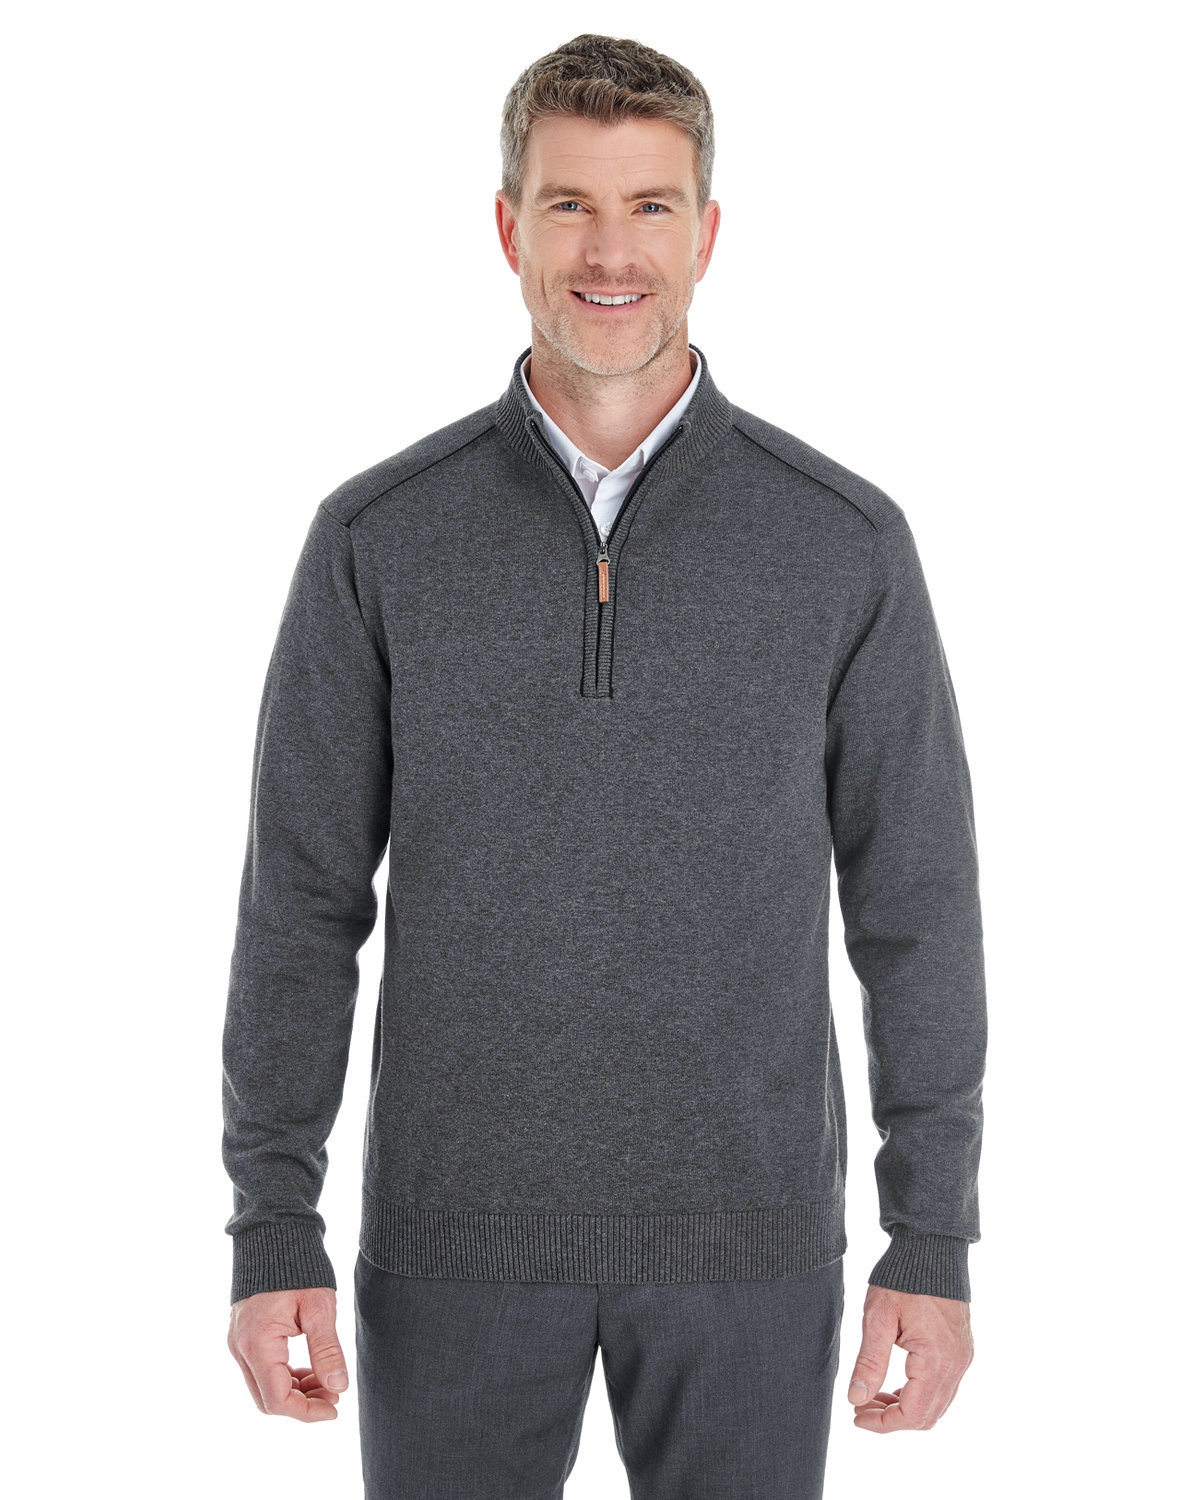 Front view of Men’s Manchester Fully-Fashioned Quarter-Zip Sweater